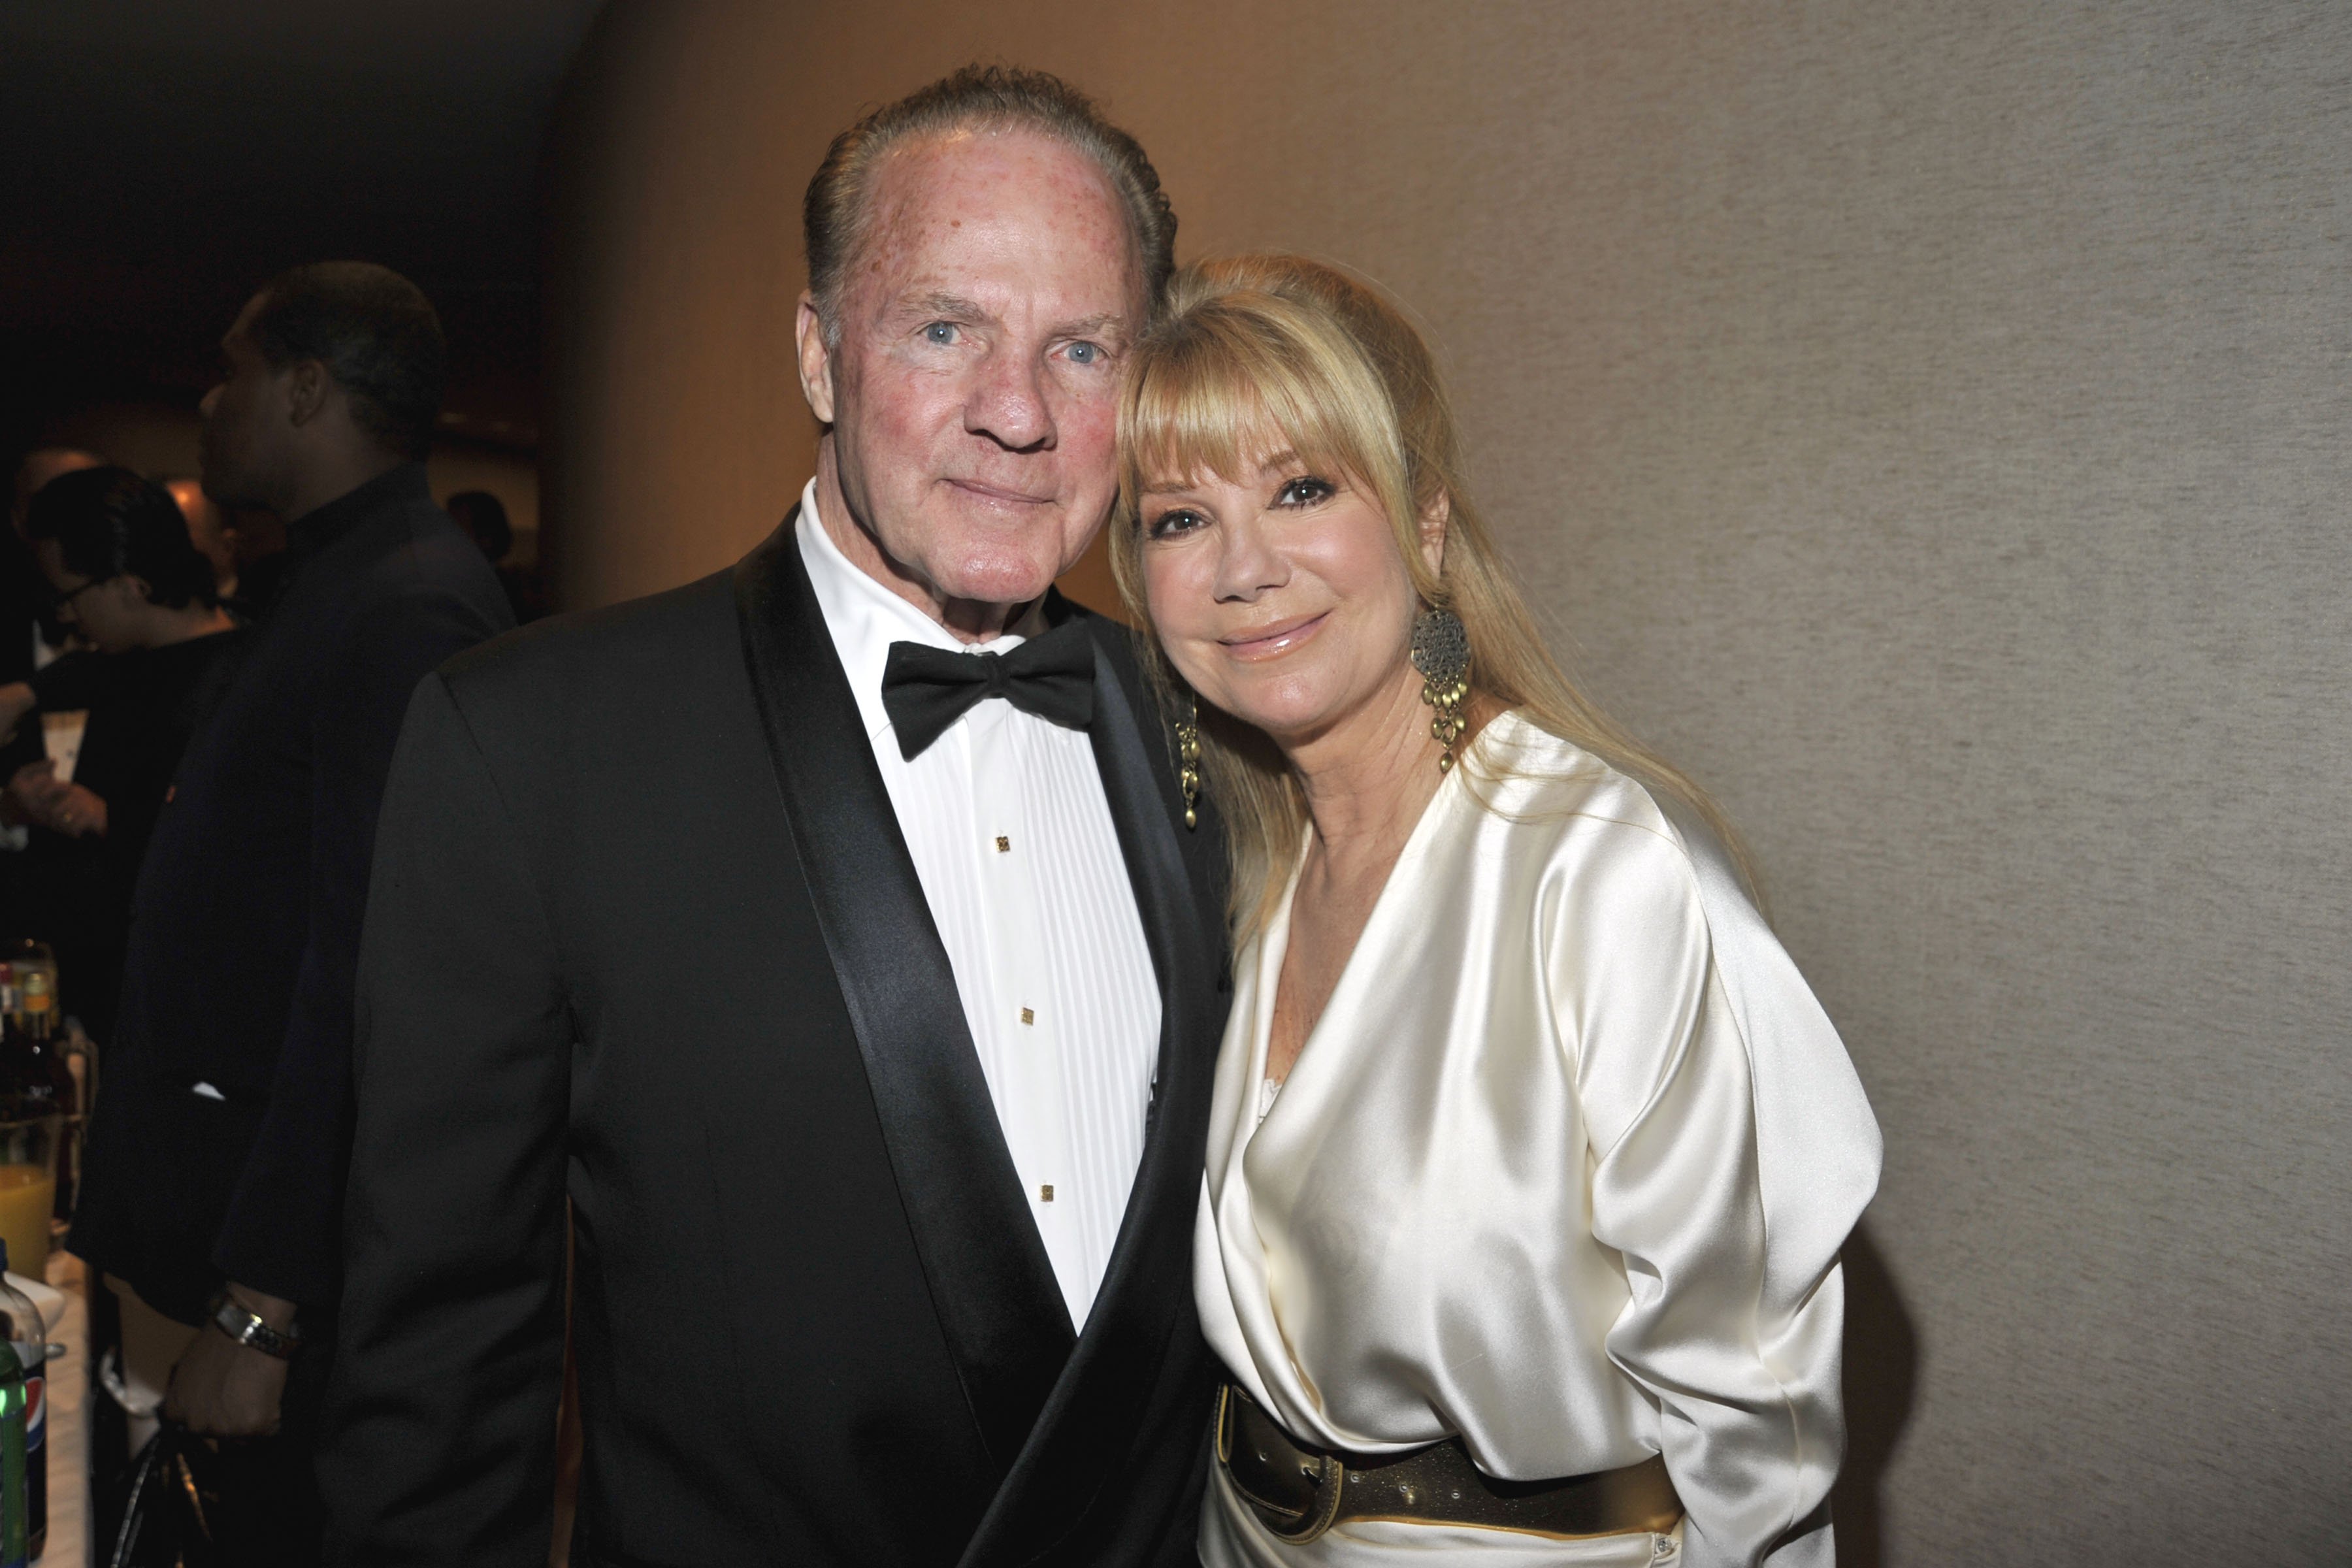 Frank Gifford and Kathie Lee Gifford attend Literacy Partners Evening of Readings Gala at David H. Koch Theater on May 10th, 2010 in New York City | Photo: Getty Images